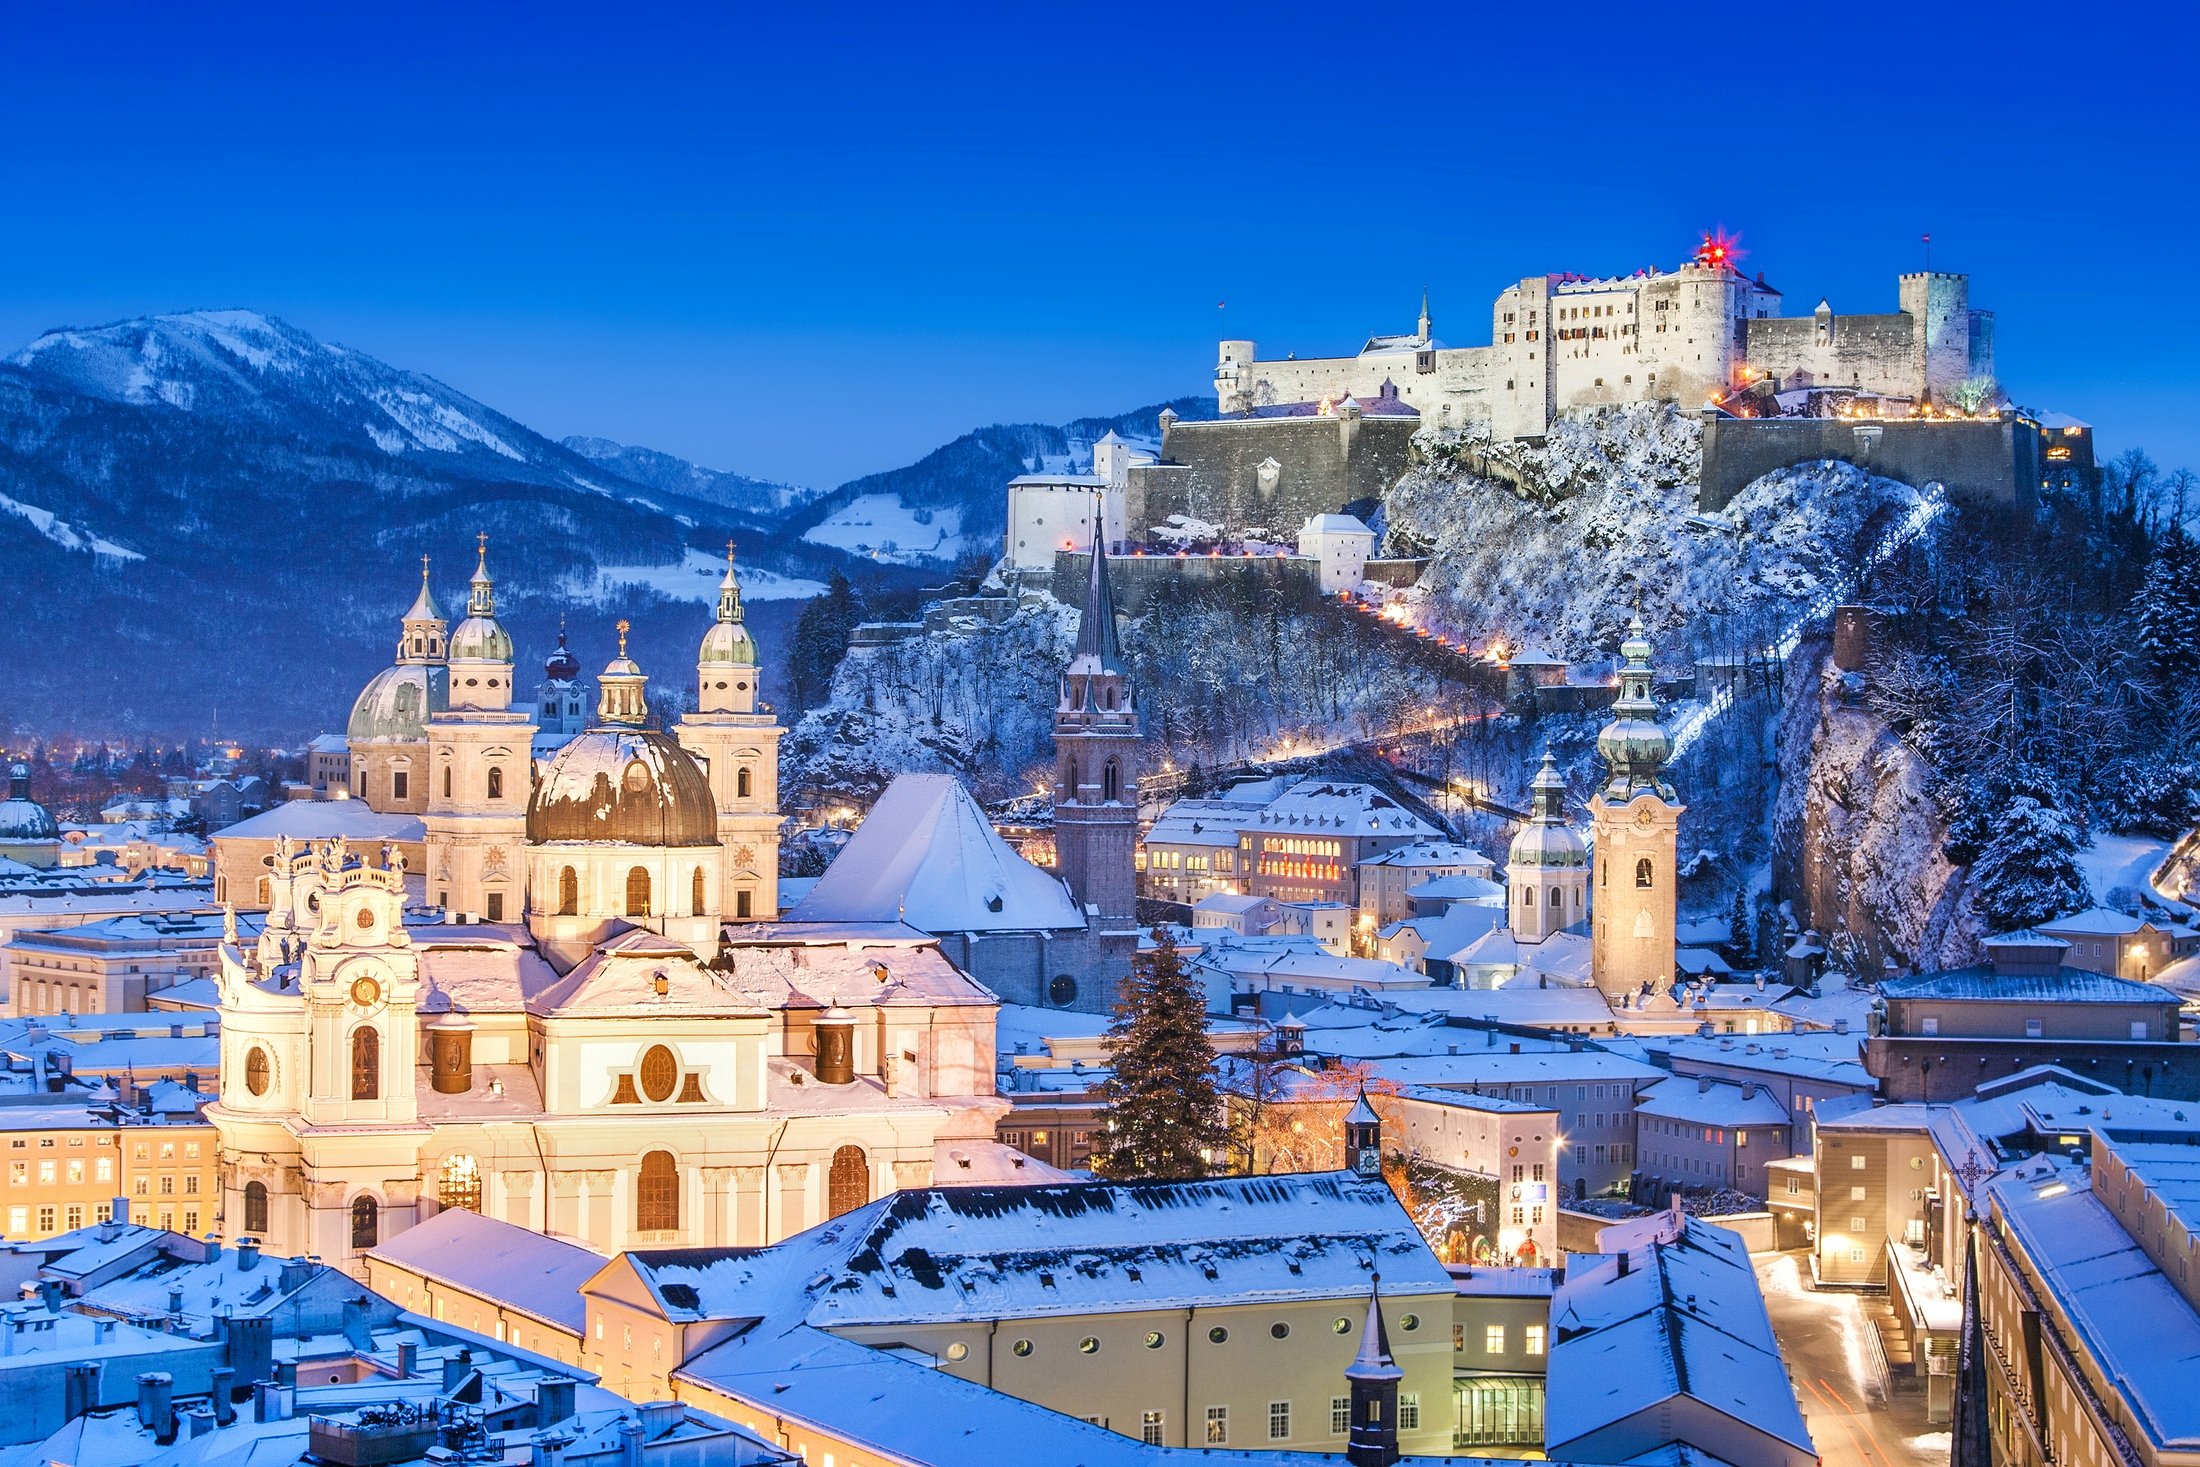 Salzburg, birthplace of Mozart, dazzles all with enchanting history